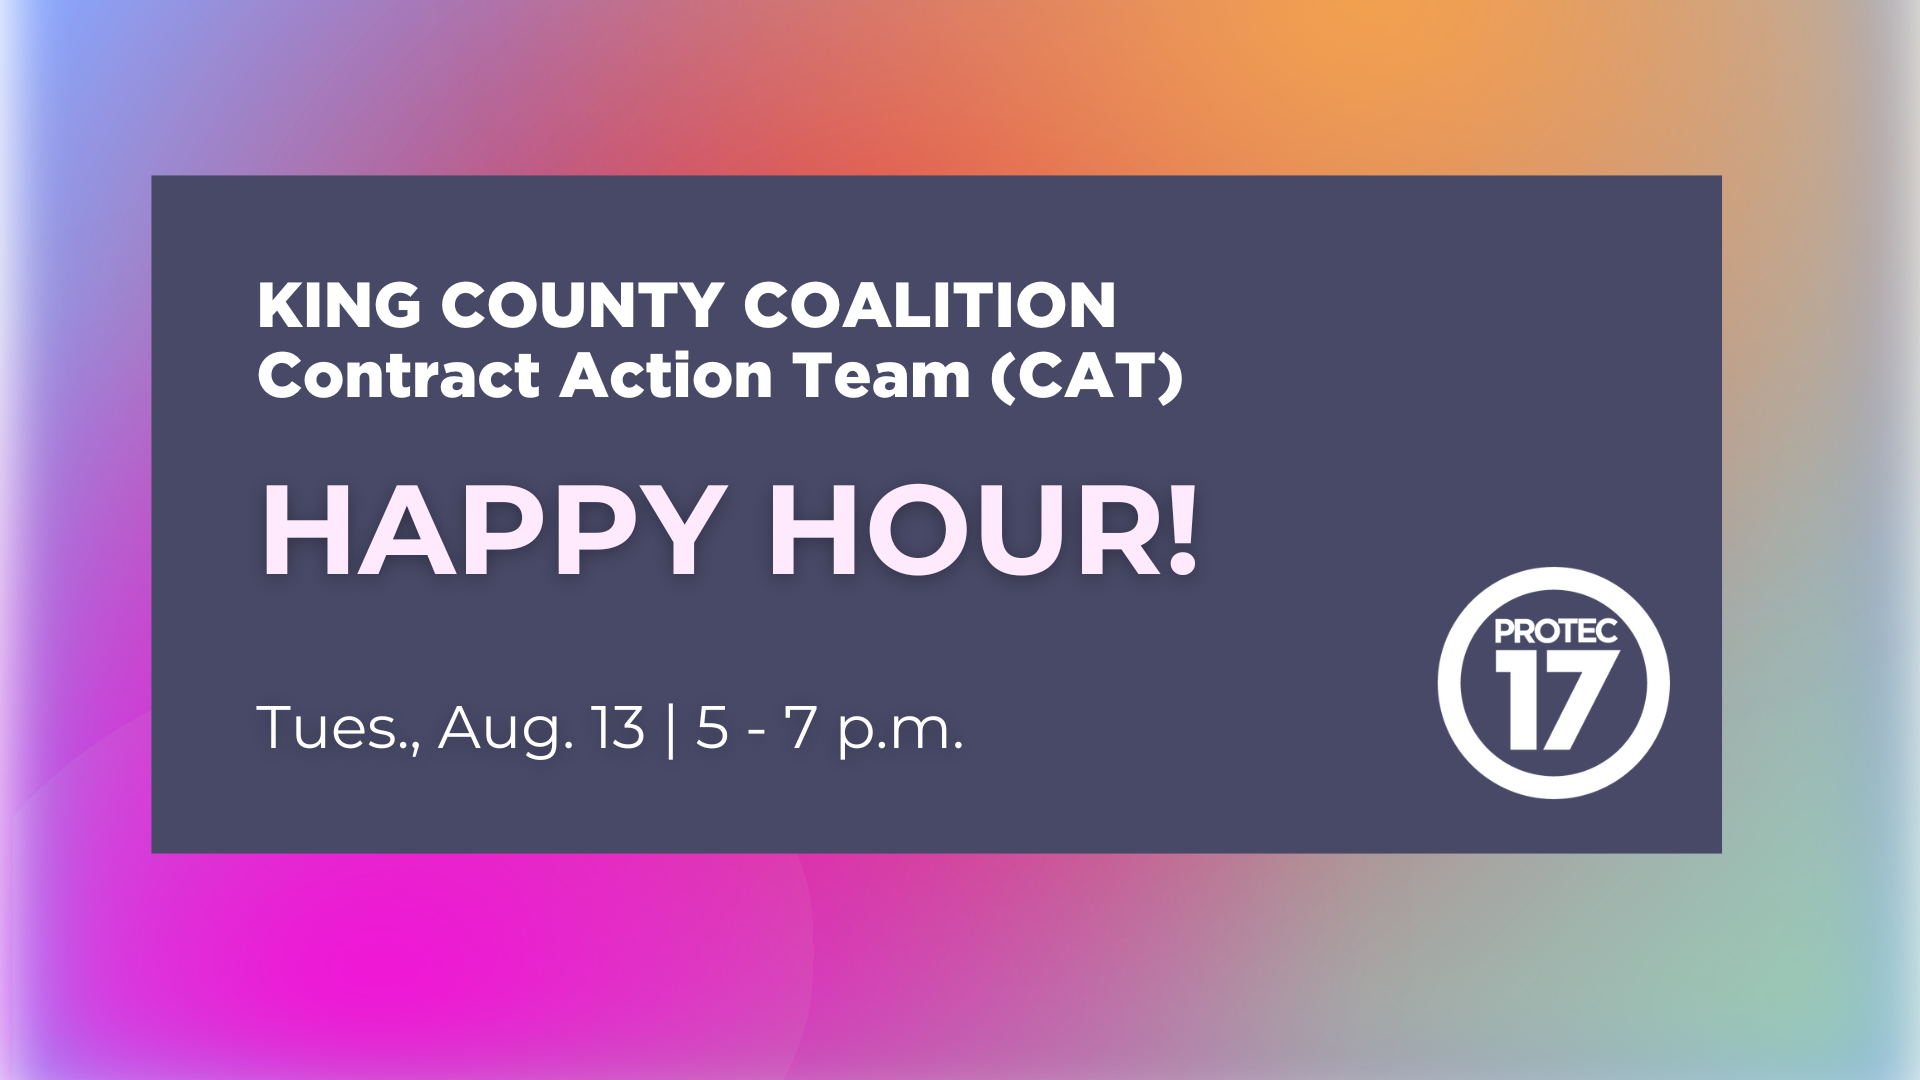 On a colorful gradient background there is a faded blue rectangle over top. The text on it reads, "King county coalition | Contract Action Team (CAT) | HAPPY HOUR! | Tues., Aug. 13 | 5 - 7 p.m." The PROTEC17 logo is in the bottom right.